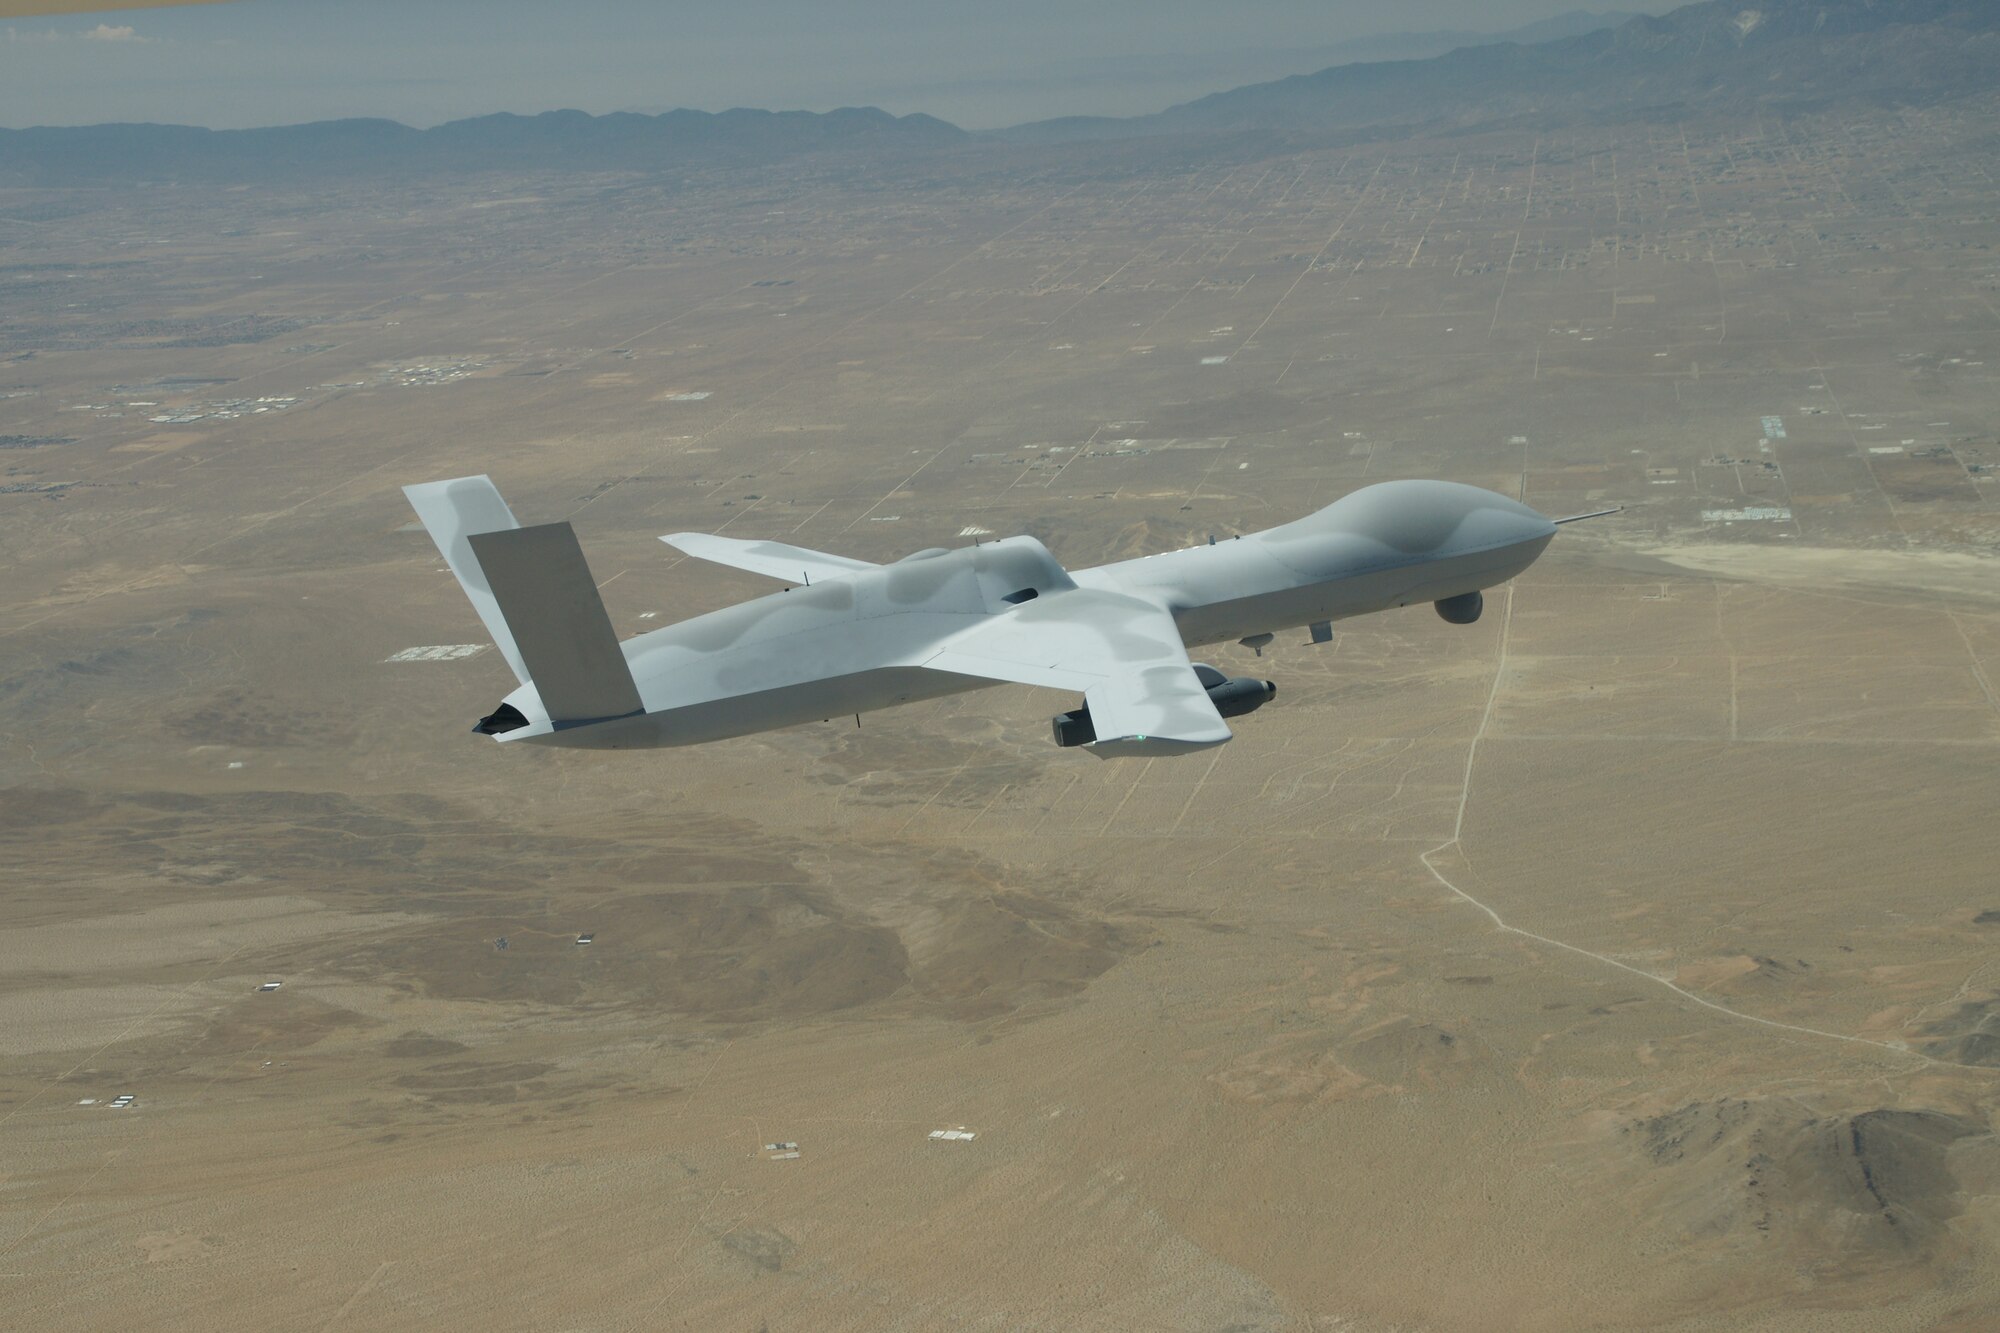 A General Atomics MQ-20 Avenger unmanned vehicle returns to El Mirage Airfield, Calif. June 24, 2021. The MQ-20 successfully participated in Edwards Air Force Base’s Orange Flag 21-2 to test the Skyborg Autonomy Core System. (Photo courtesy of General Atomics